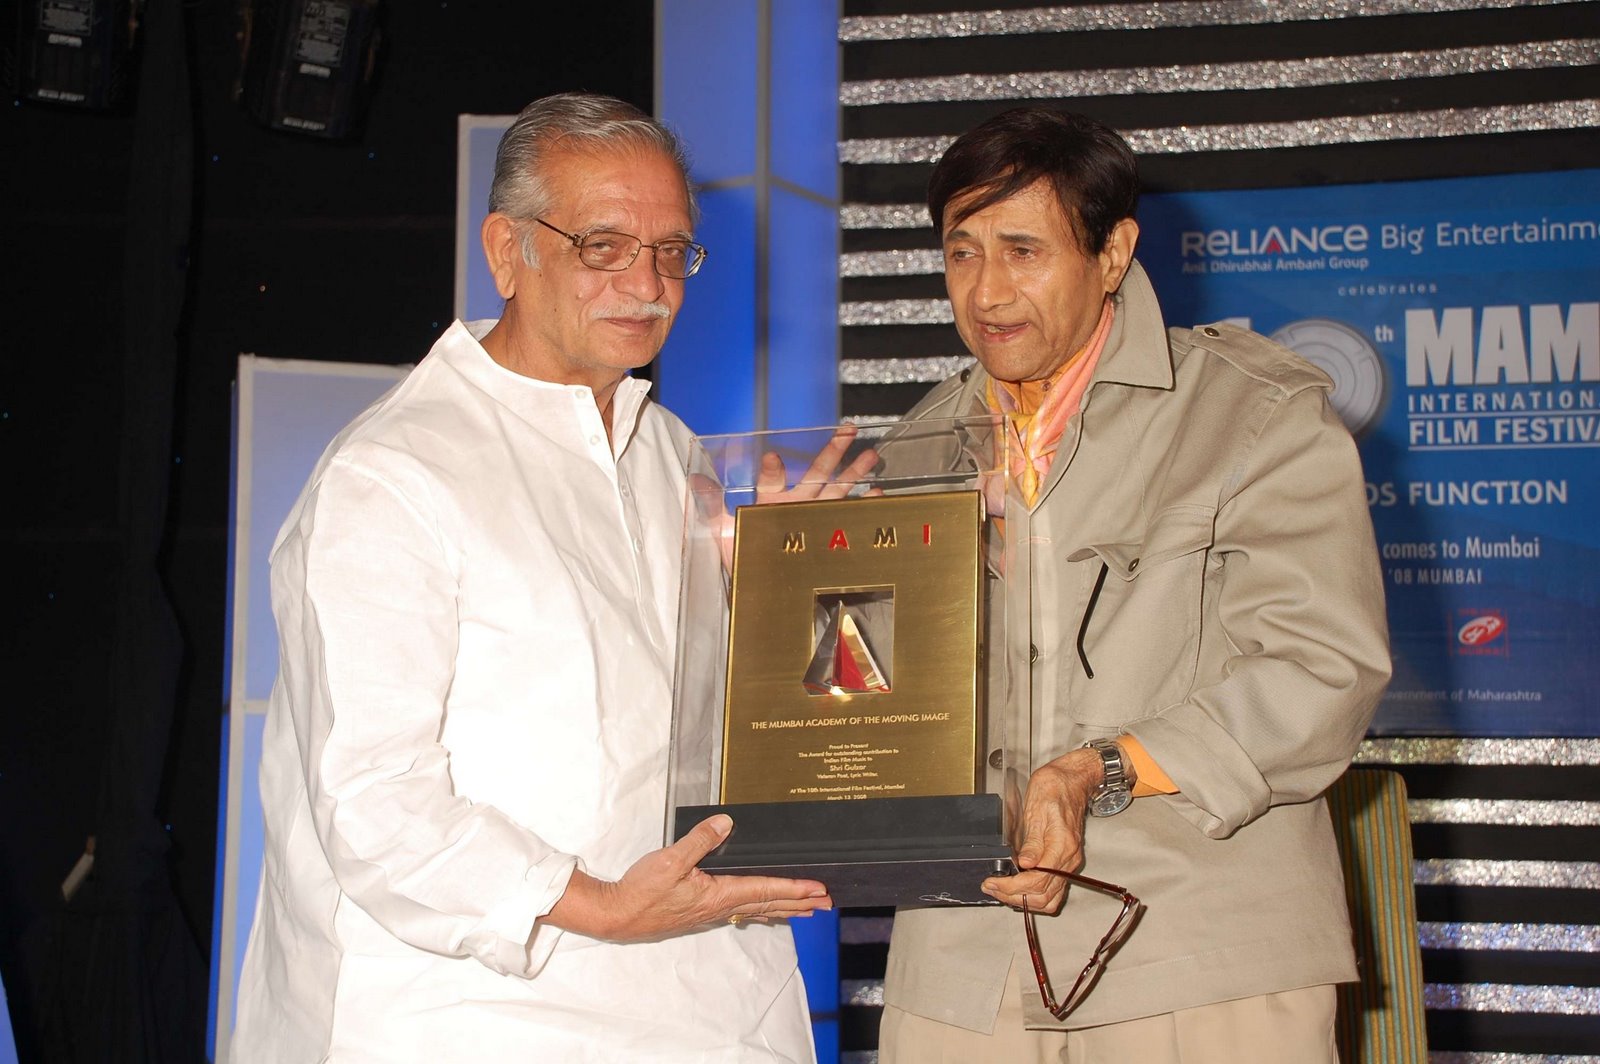 [Shri+Gulzar+Felicitated++by+Dev+Anand+for+Outstanding+Contribution+to+Indian+Film+Music+as+Lyrics+Writer.JPG]